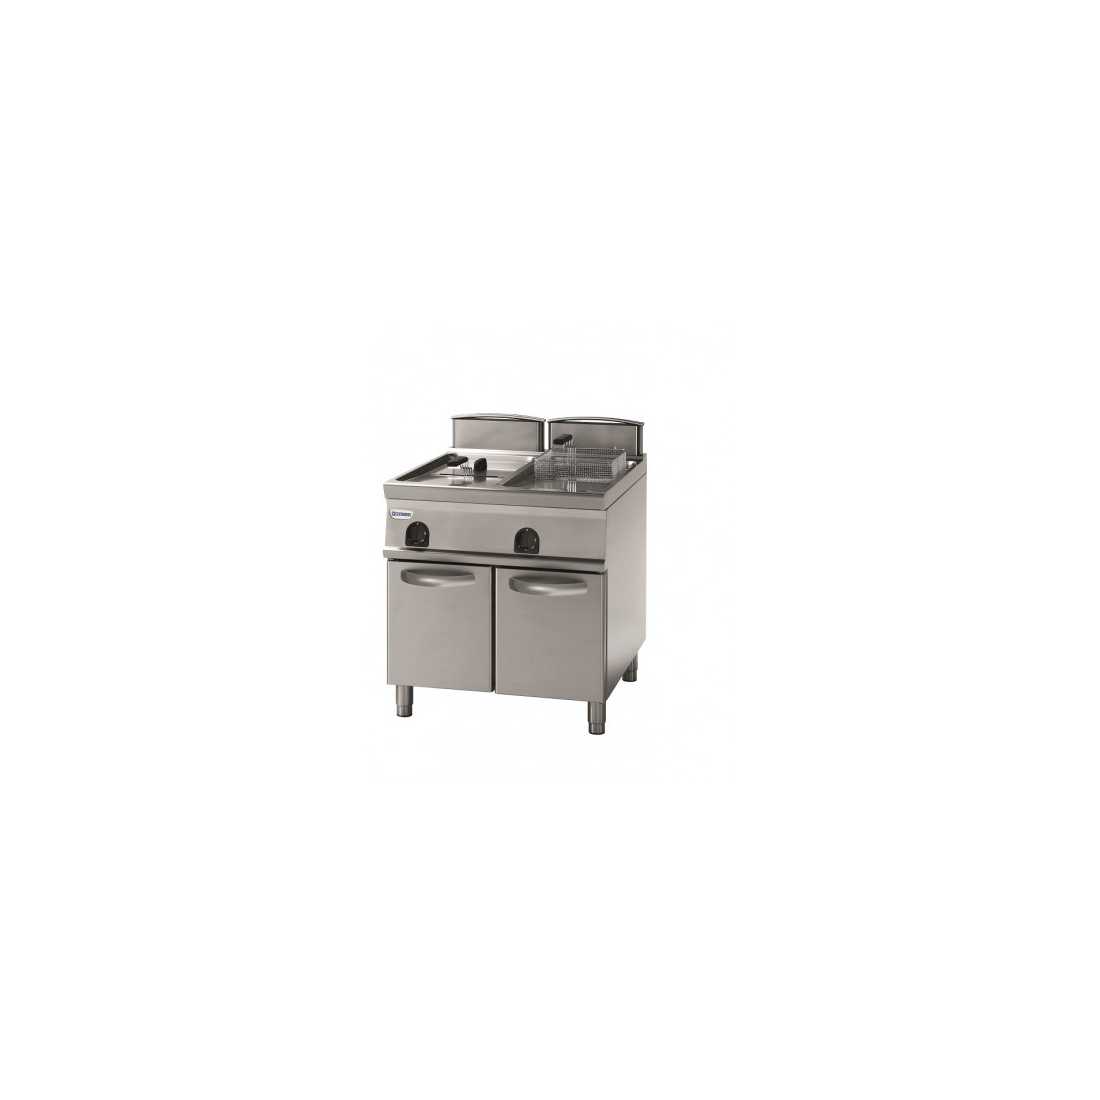 Tecnoinox ,FRV87FG9T, High-Capacity Freestanding with Cabinet Double Gas Deep Fryer 34L Total